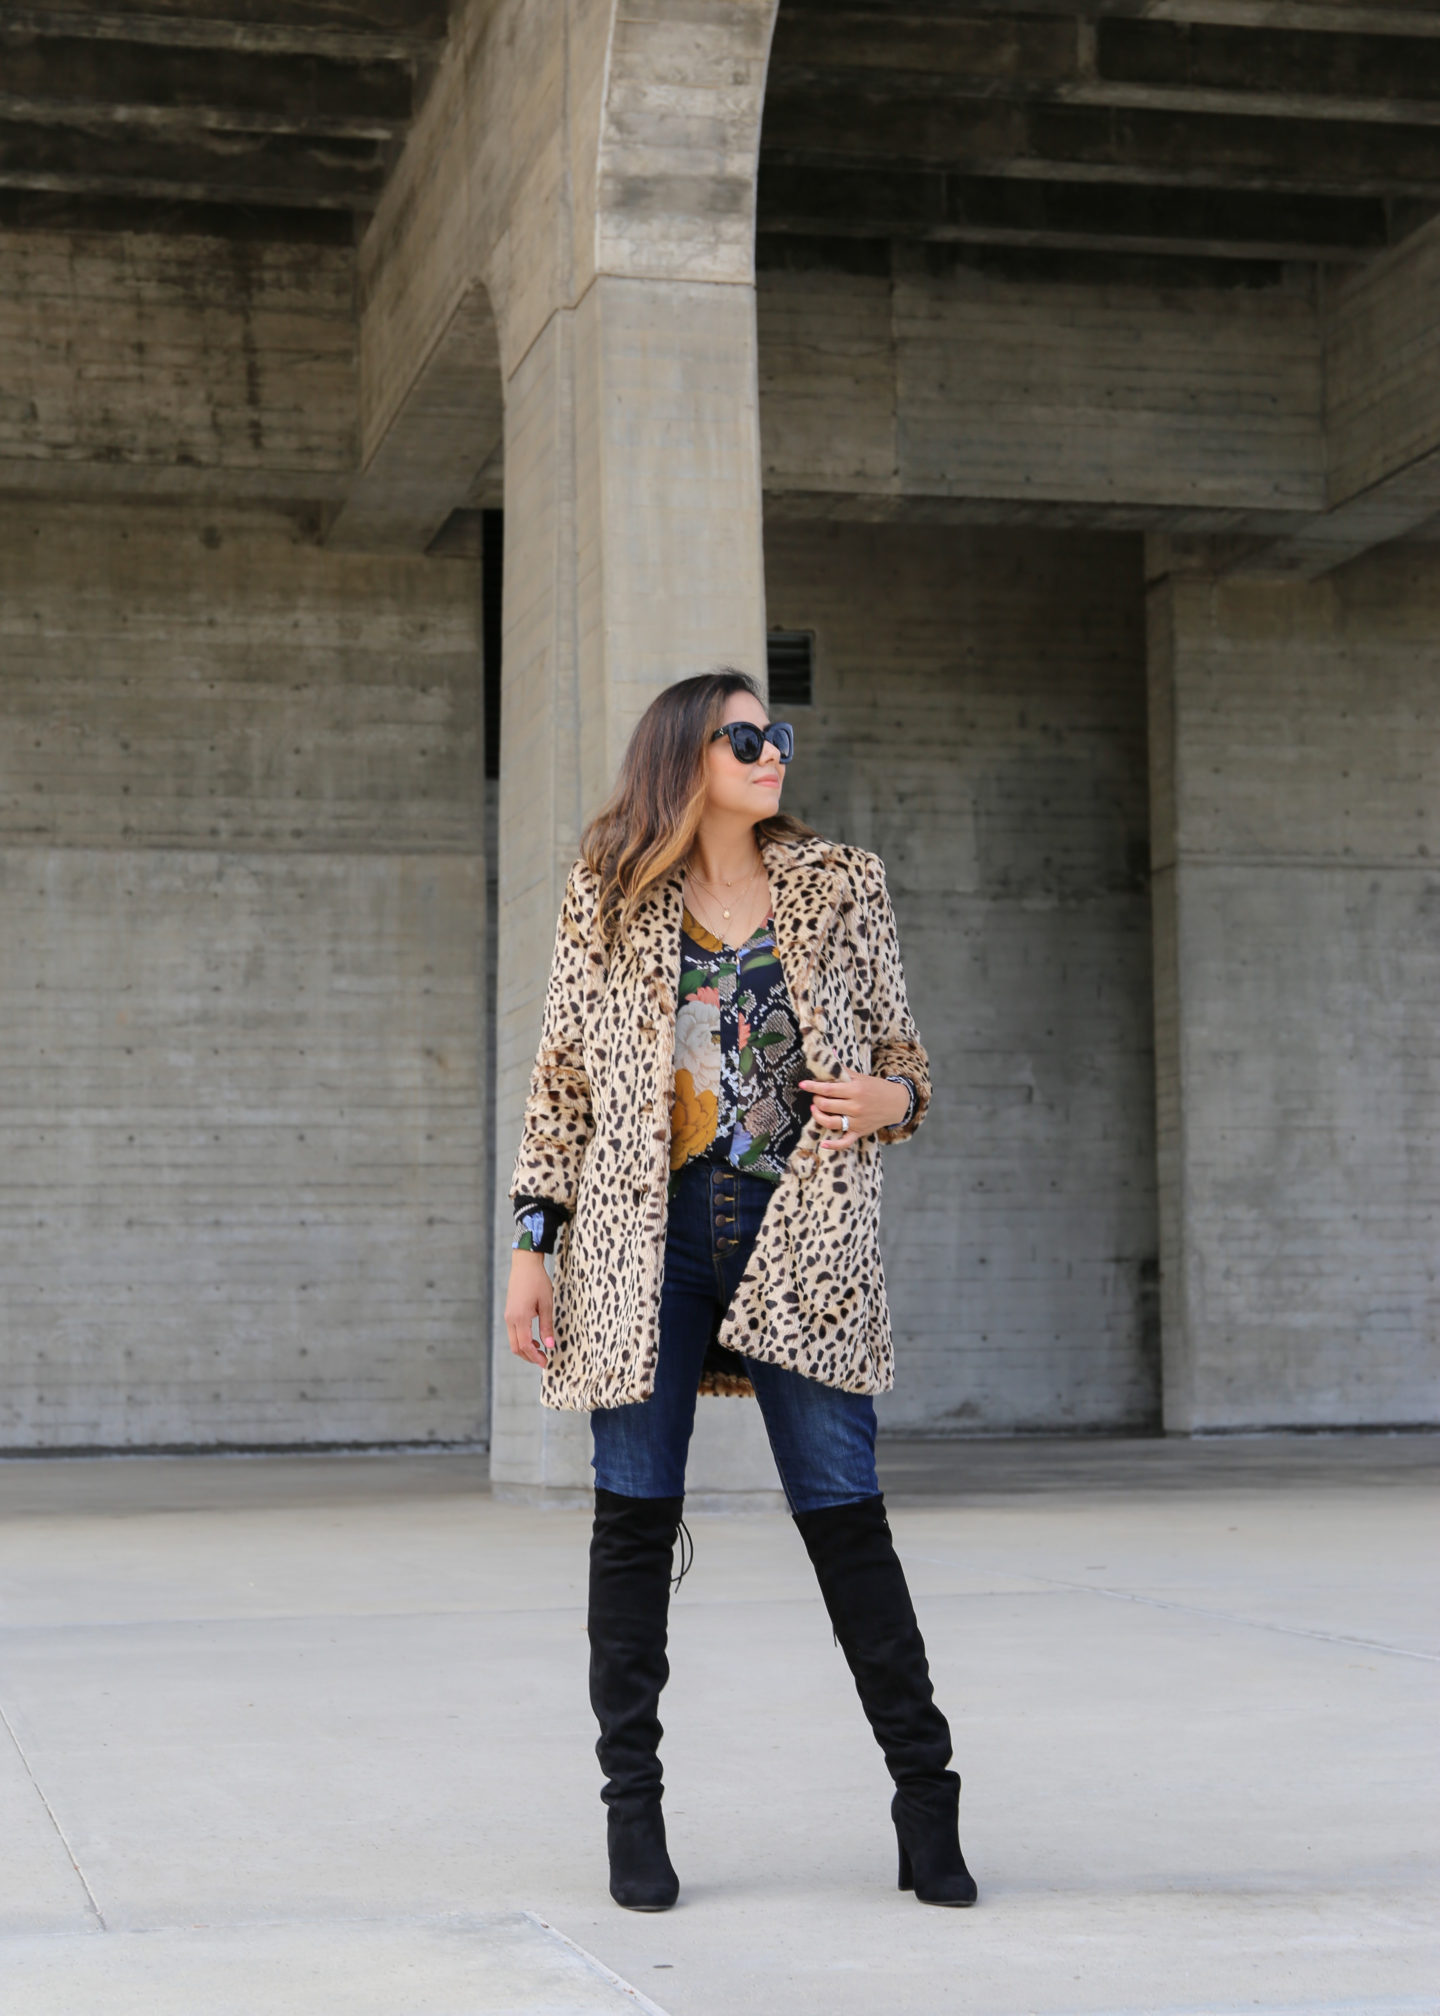 how to wear animal prints and florals, how to wear leopard print and florals